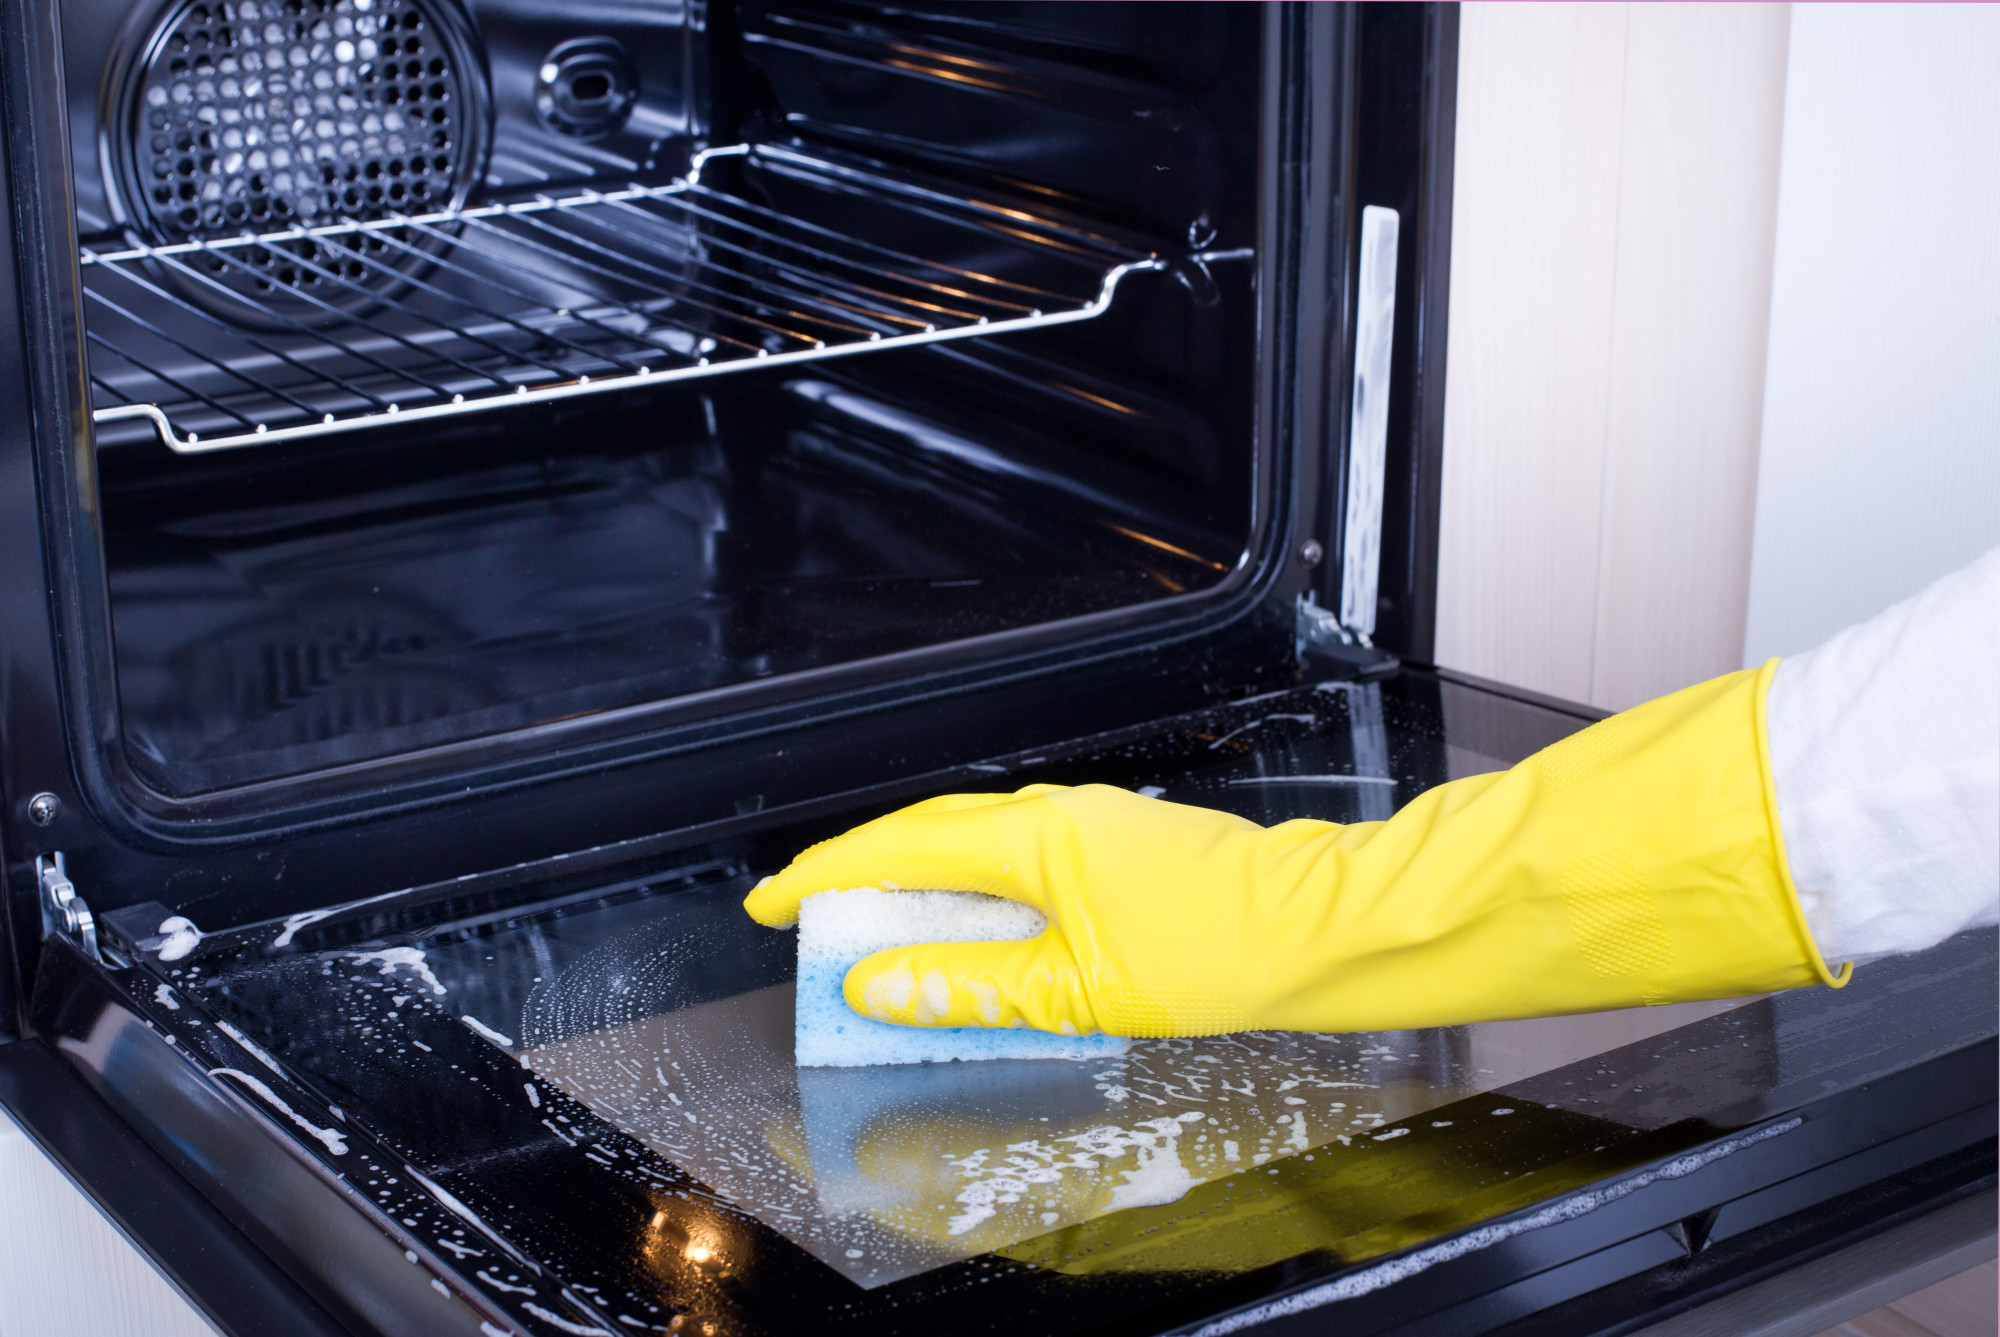 How often do you clean your oven at home? Do you want to know how to clean an oven quickly? Read on to learn how to clean it the right way.